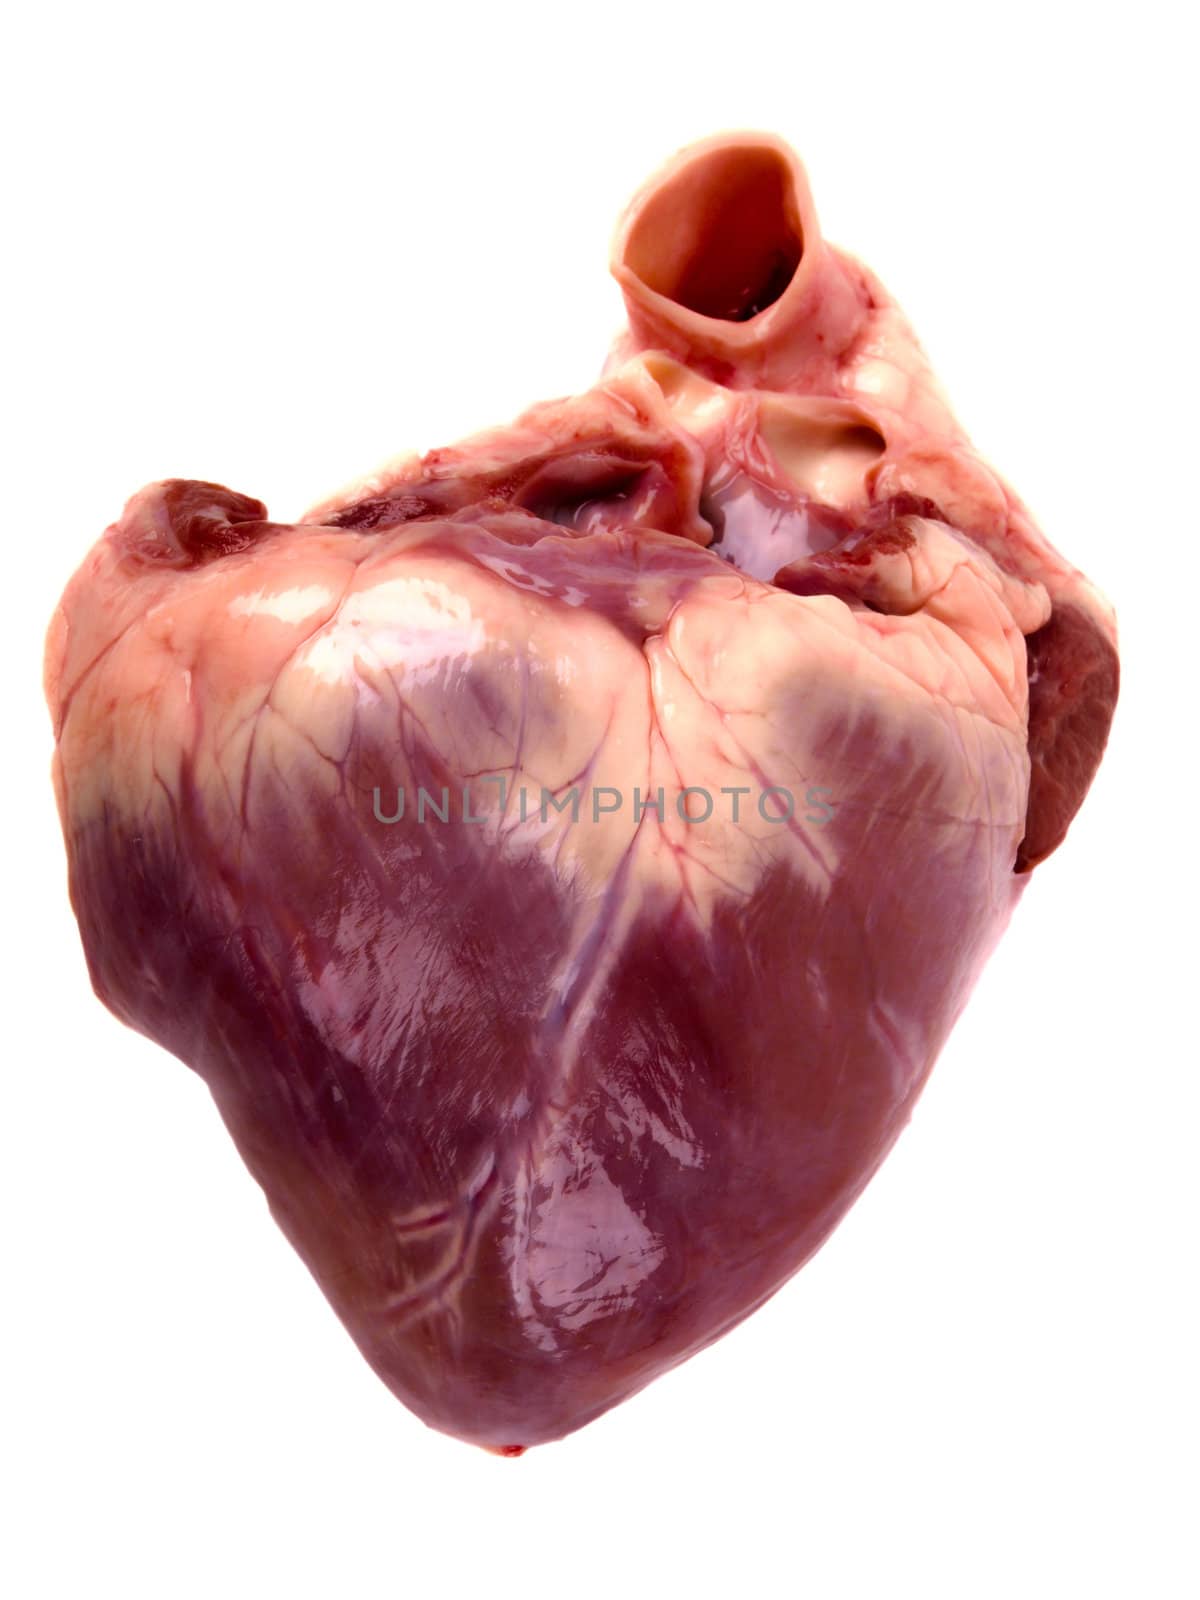 pig heart. Close up on white background by dotweb